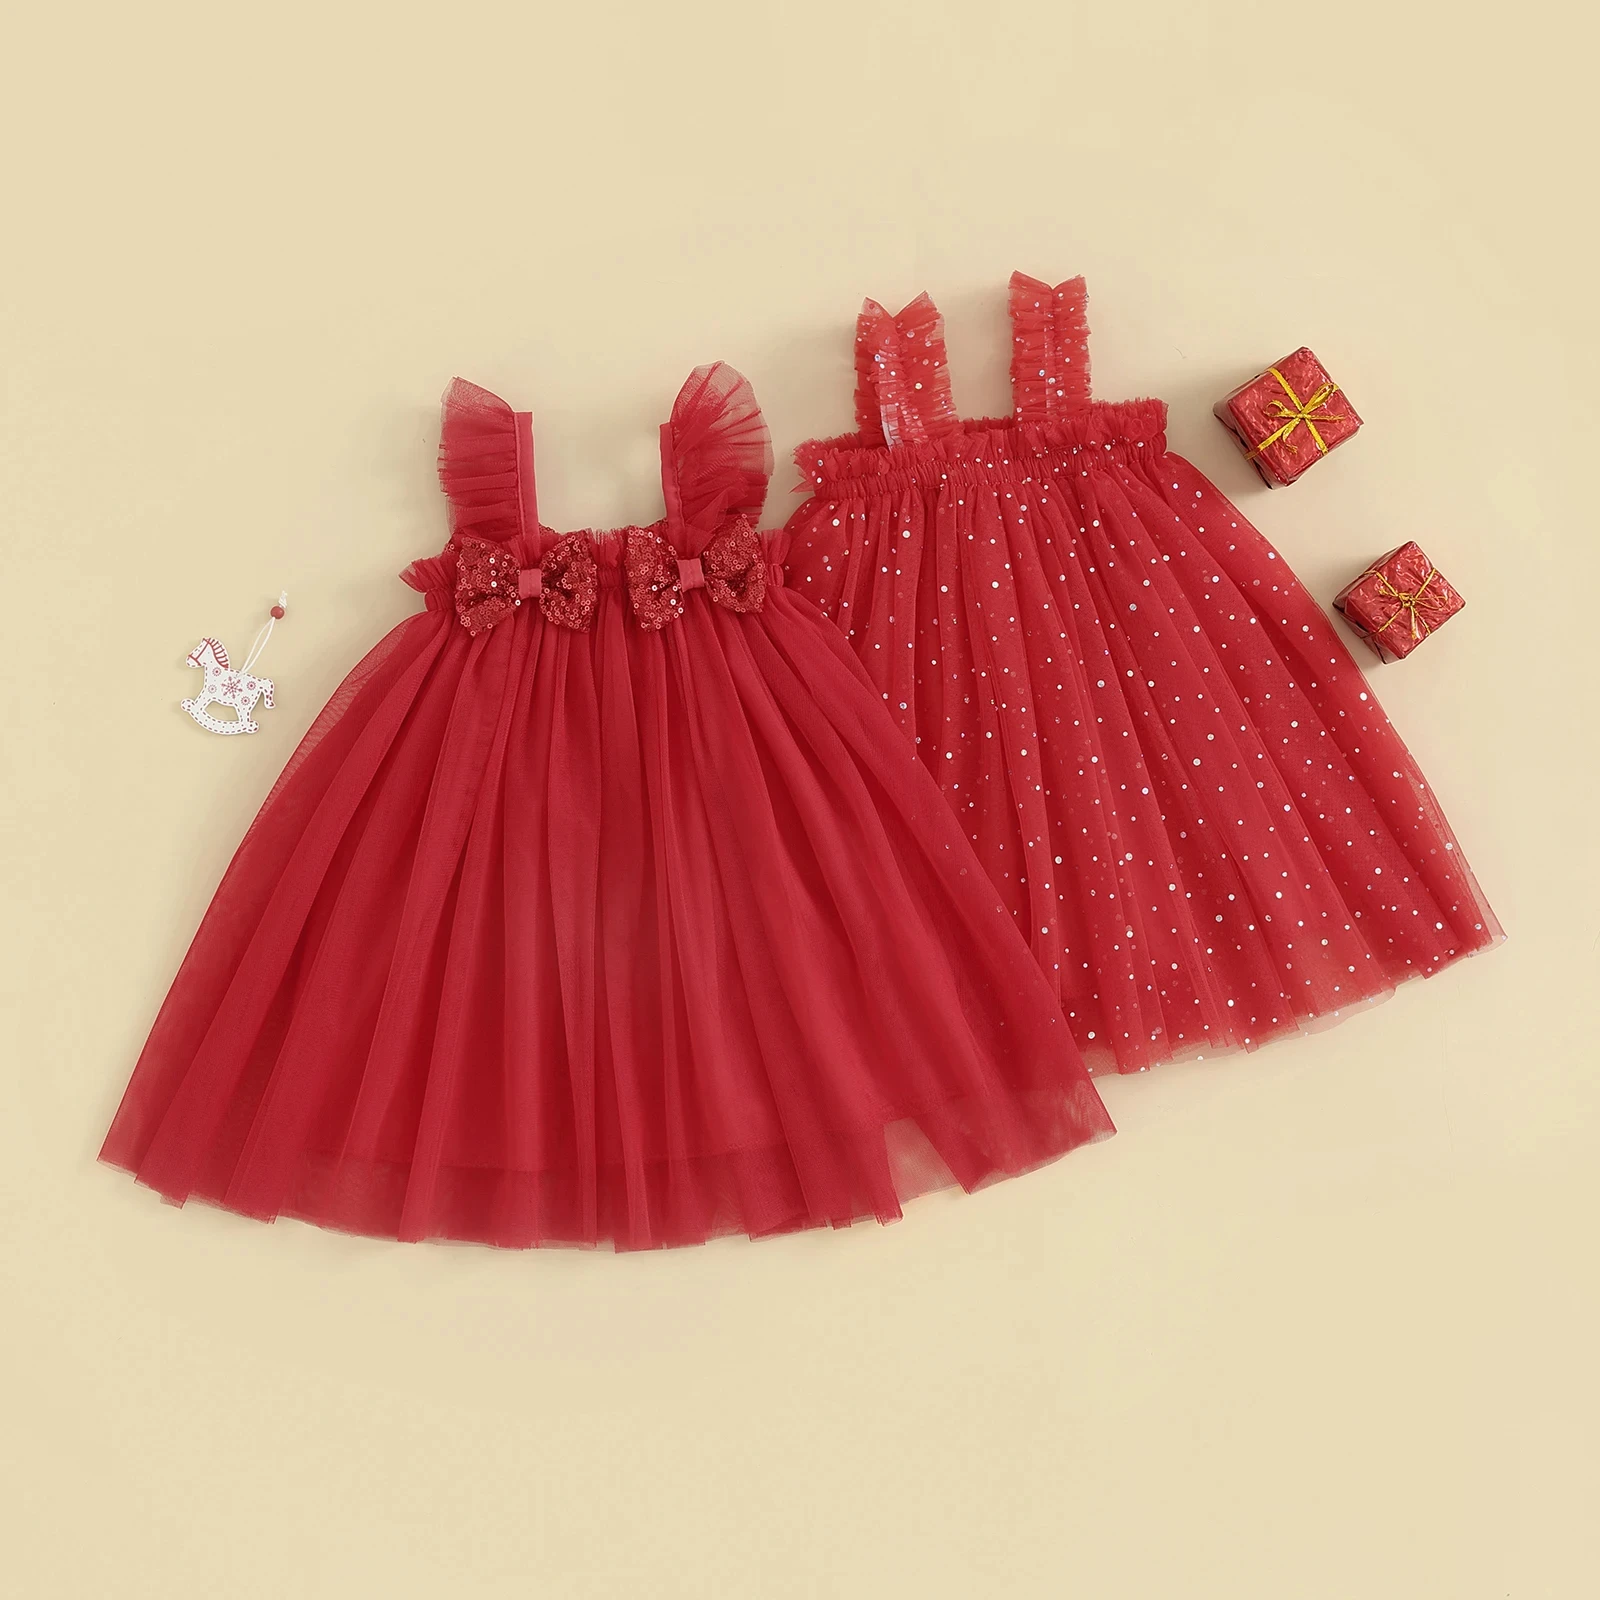 

6M-4Y Toddler Kids Baby Girls Christmas Dress Red Tulle Bow Sequins Party Dresses Newborn Infant New Year Costumes for Girls